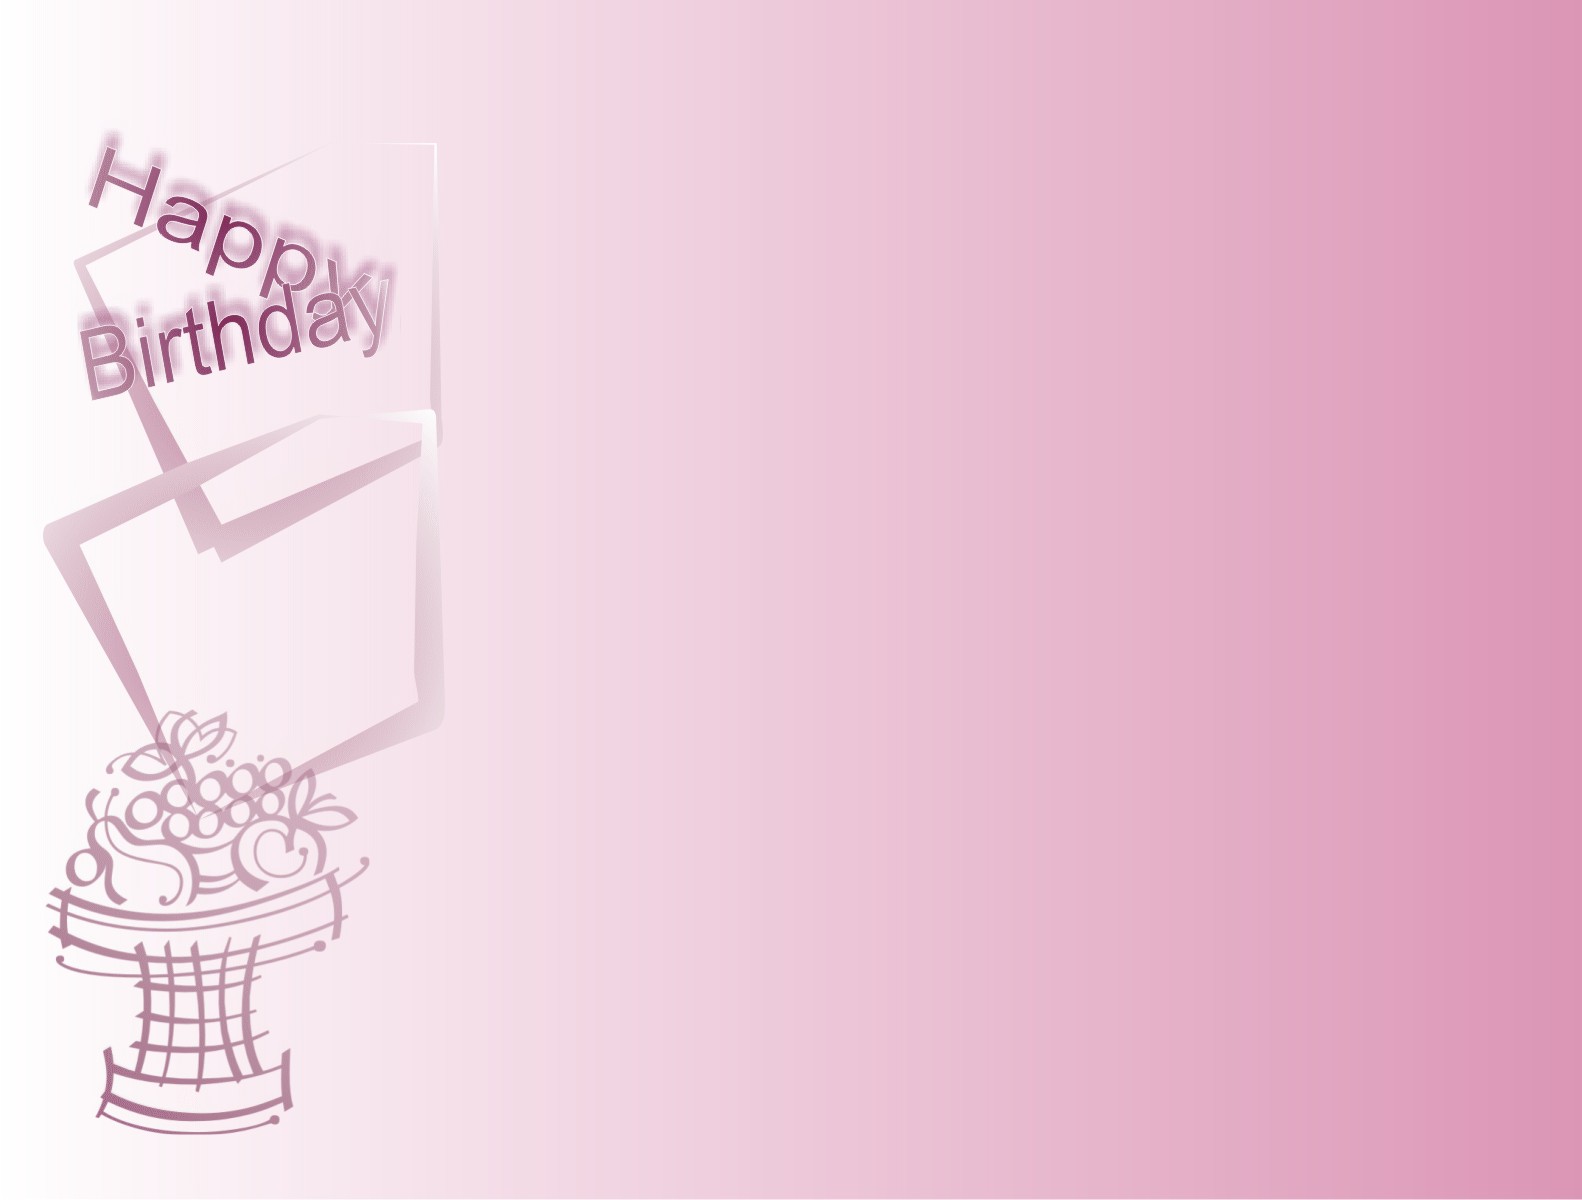 Happy birthday wishes Wallpaper With Resolutions Pixel